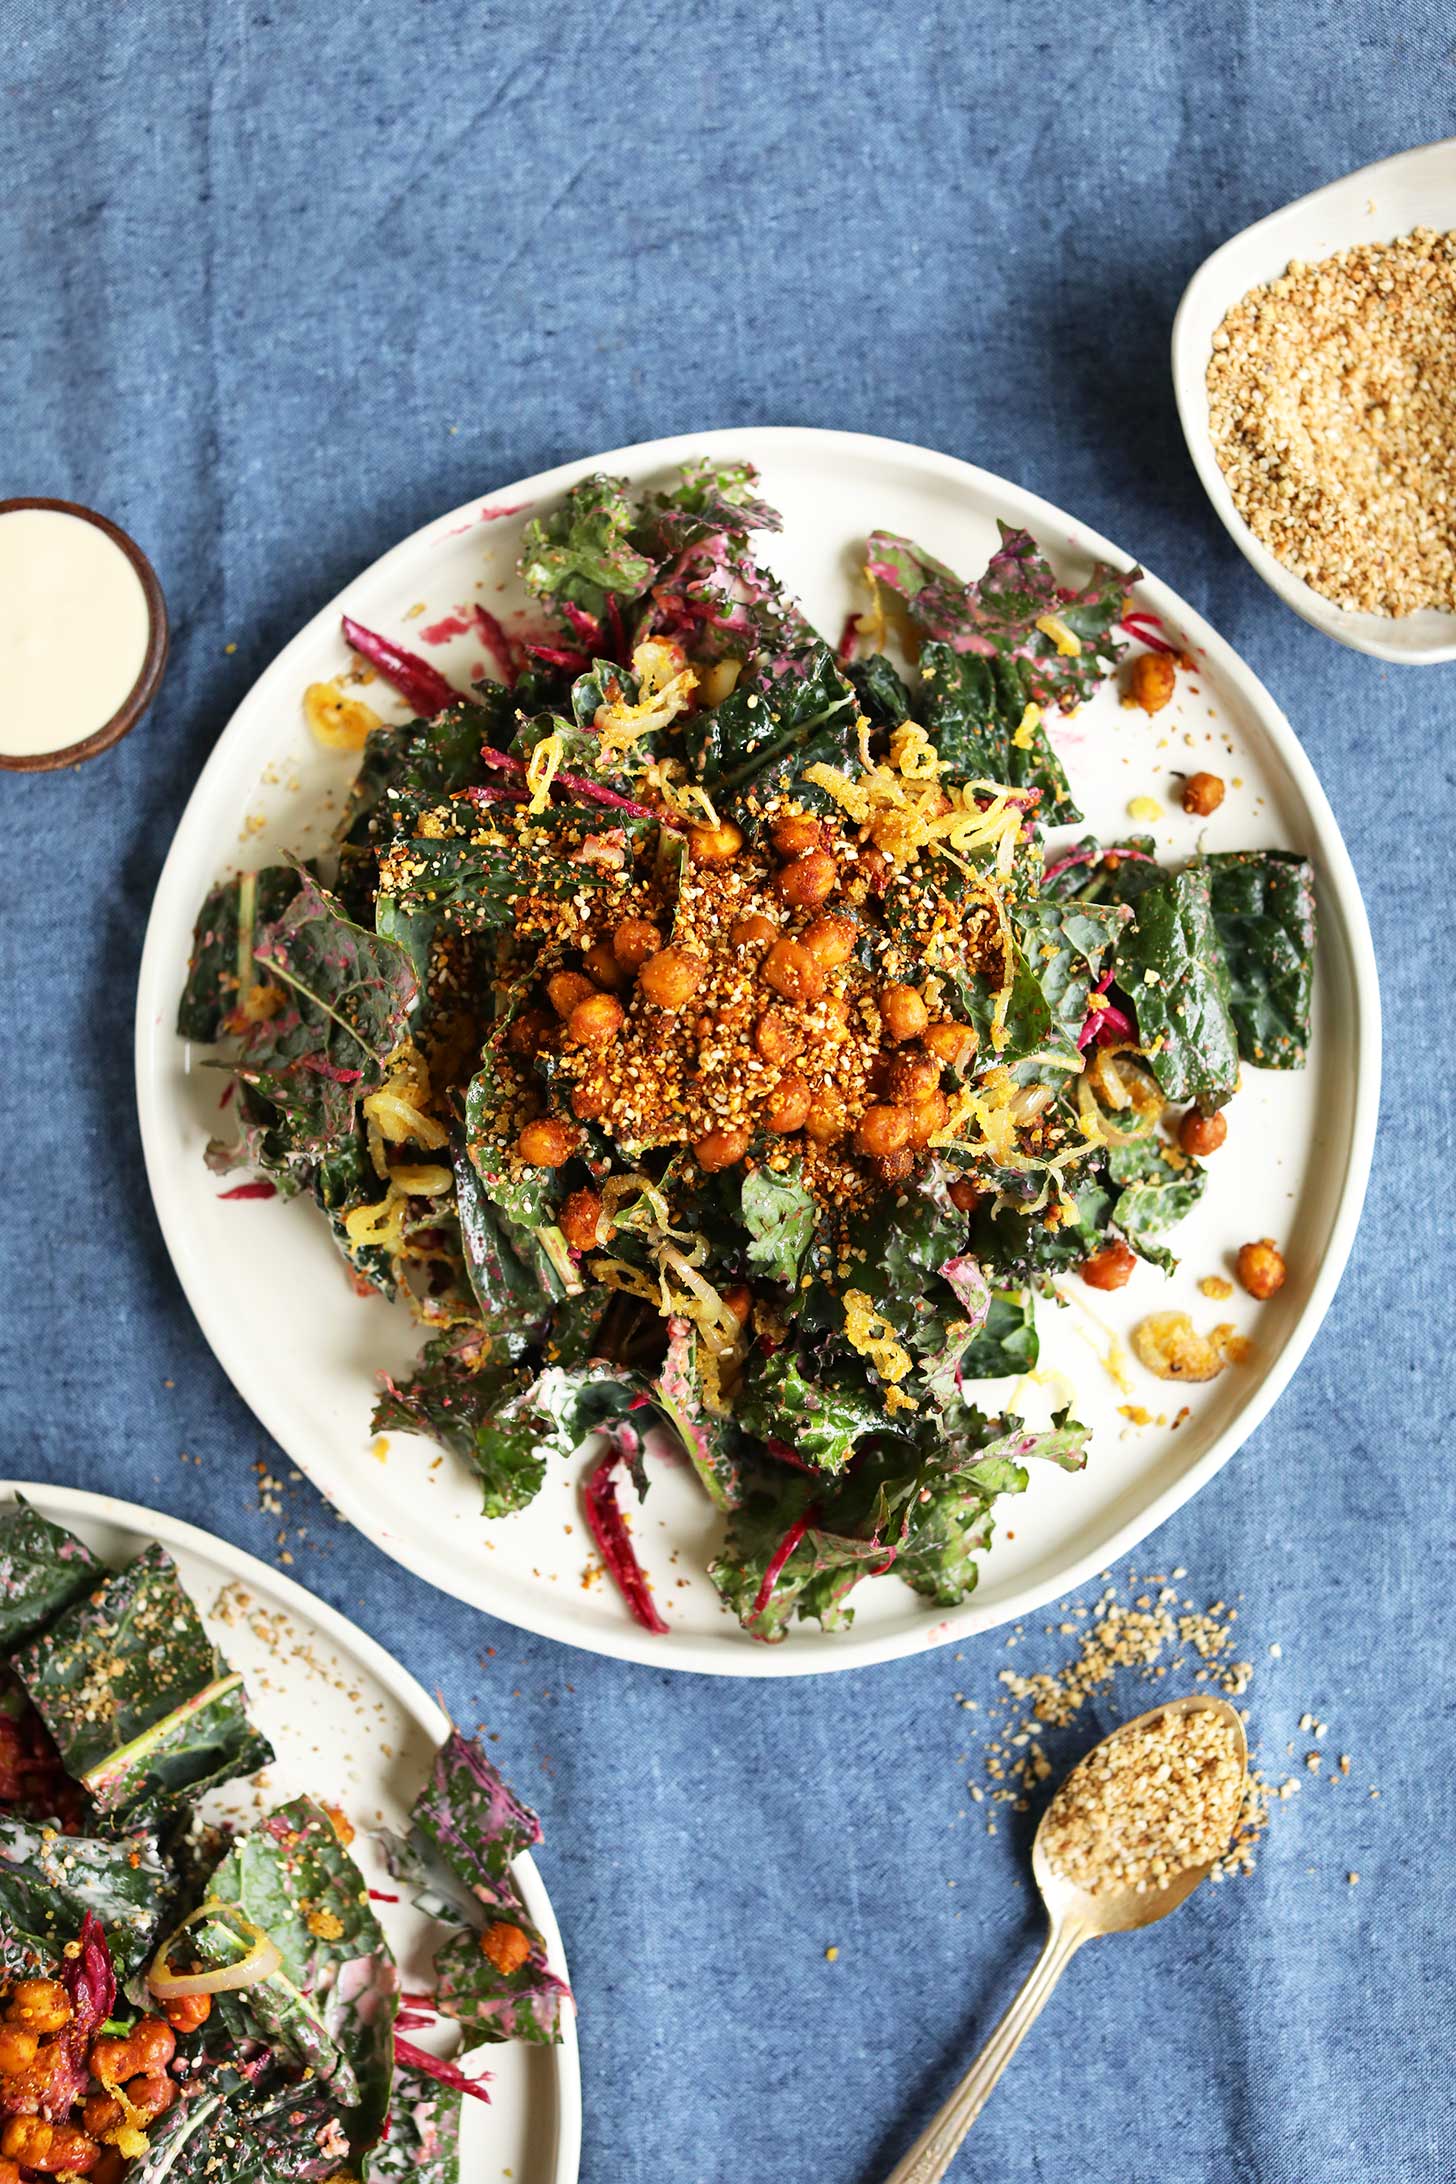 Hearty serving of our Kale Salad with Smoky Chickpeas, Beets, and Dukkah